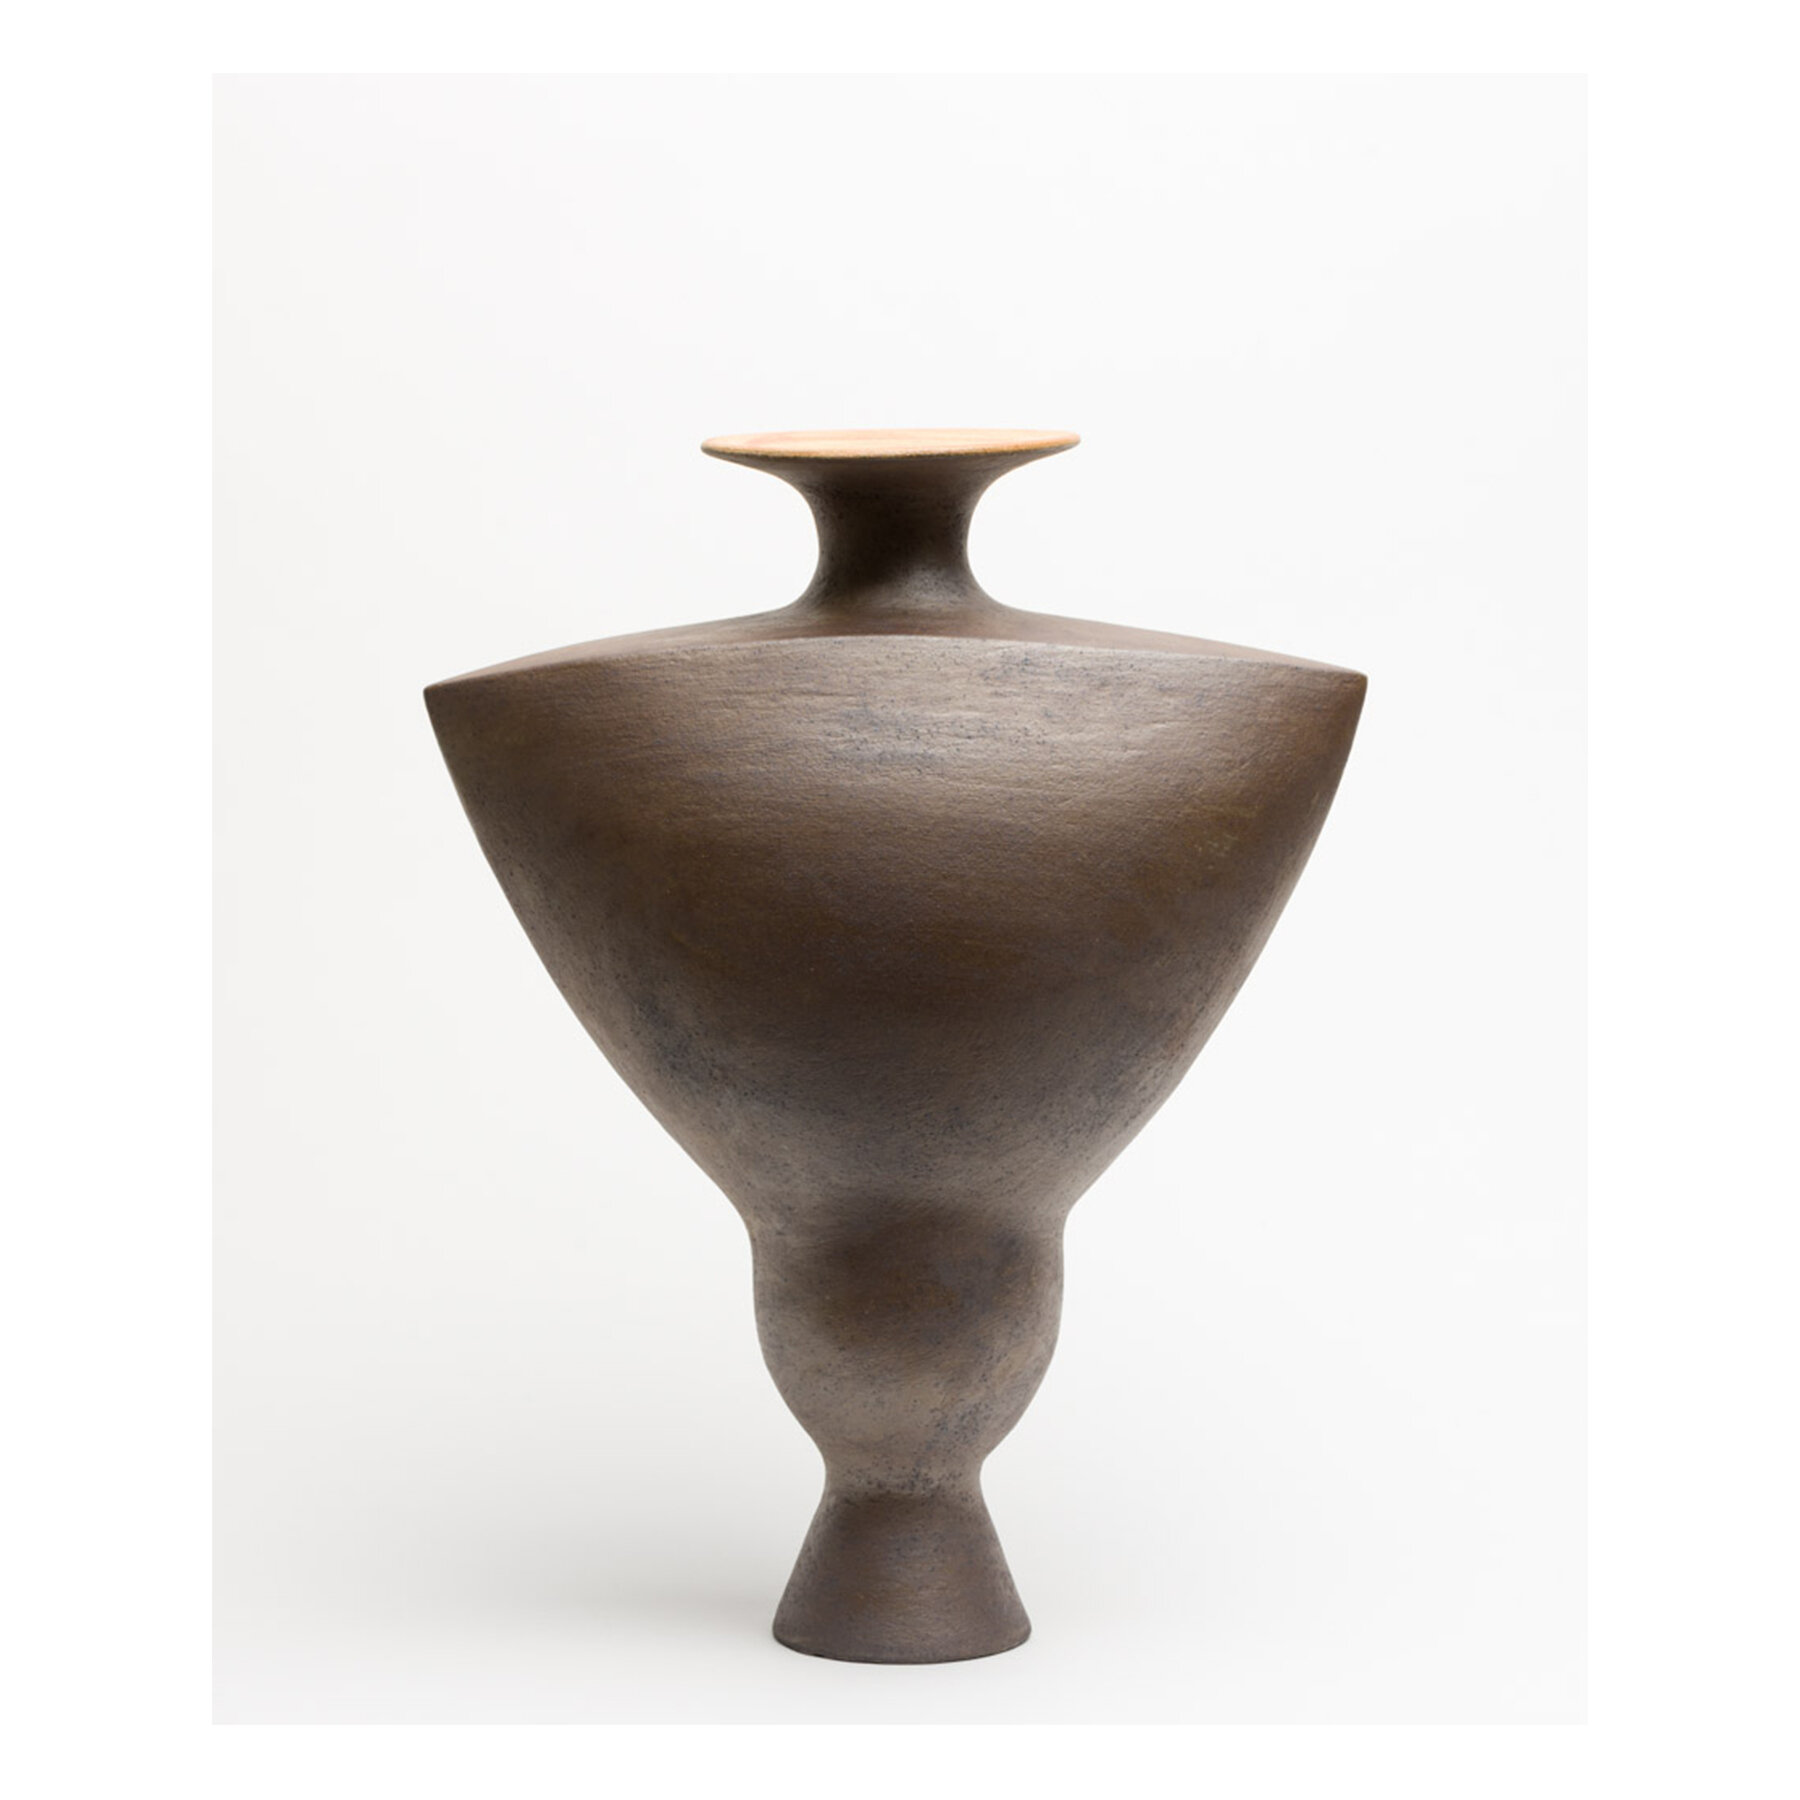 &quot;A pot is made alive by the potter&rsquo;s understanding of the life of abstract form.&rdquo;

A quote from Wayne taken from &lsquo;Year of honours for a master potter&rsquo; by Eve Johnson, The Vancouver Sun, November 9, 1983.

Vase with wide s